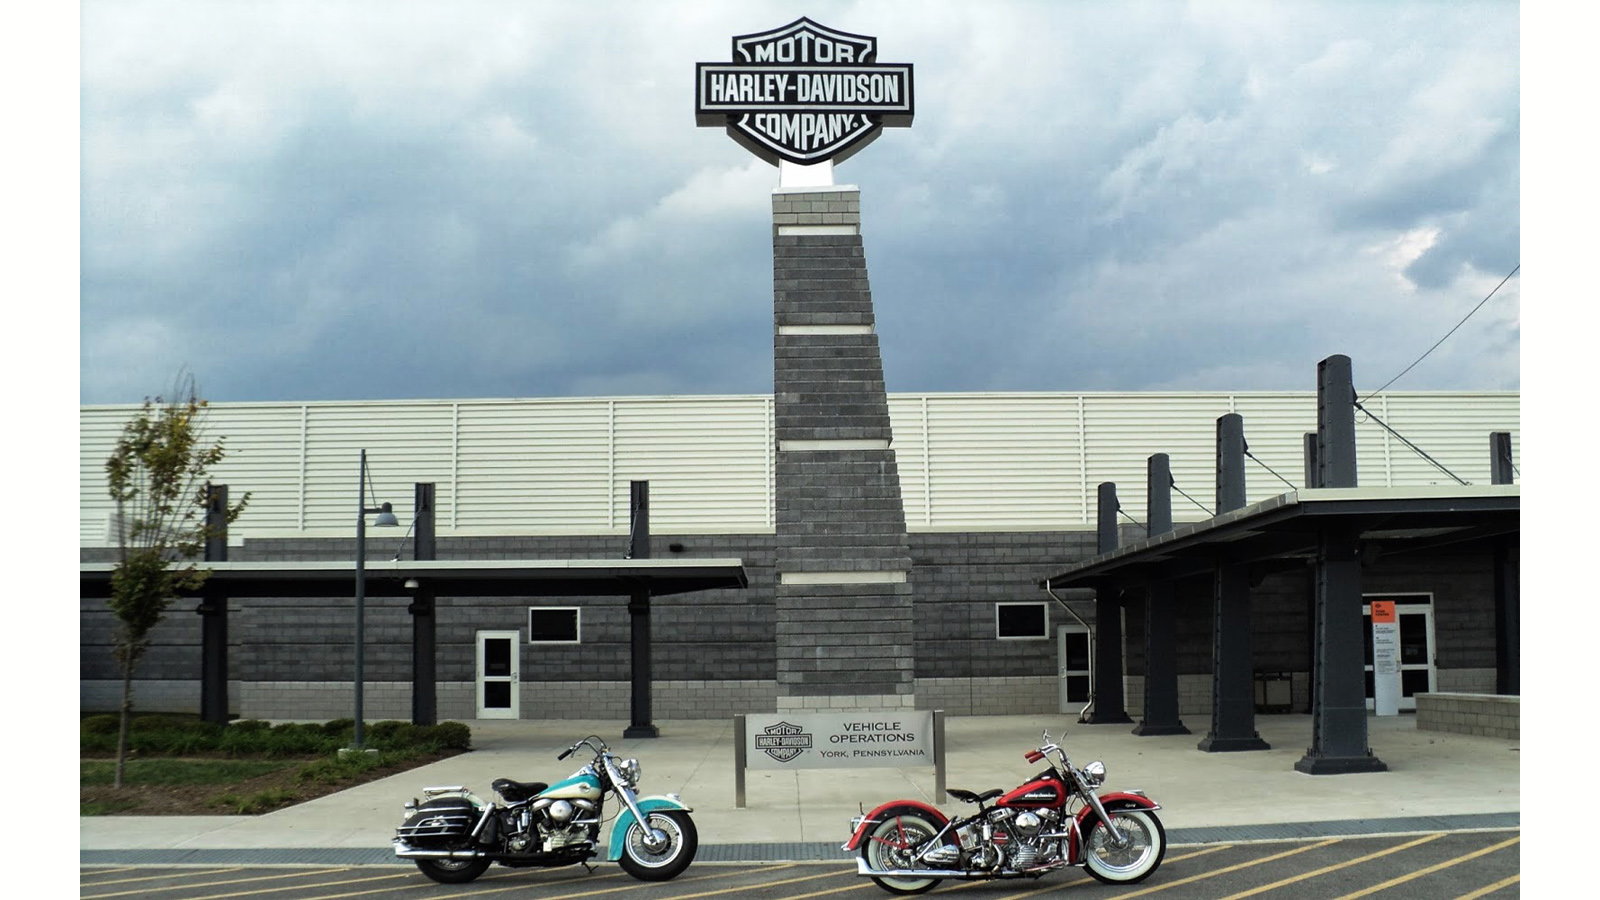 Harley Davidson S York Pa Plant As An Example To The World Photos Hdforums